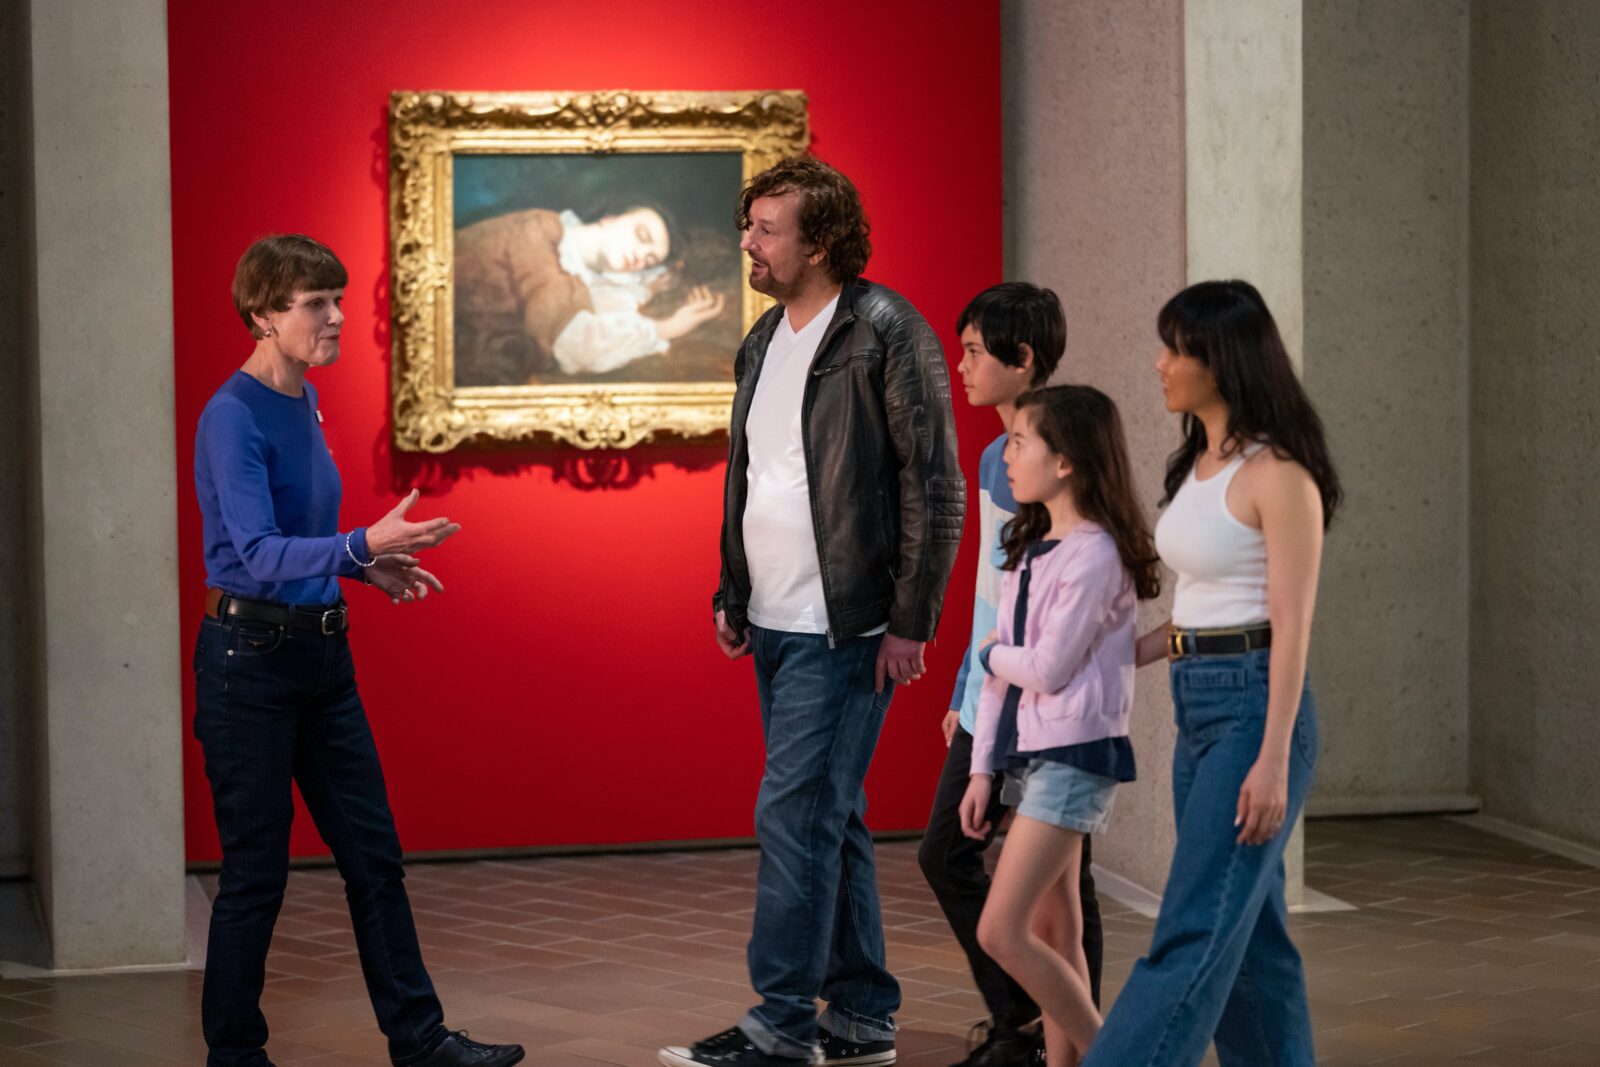 A tour guide and a family in front of a framed artwork in a gallery